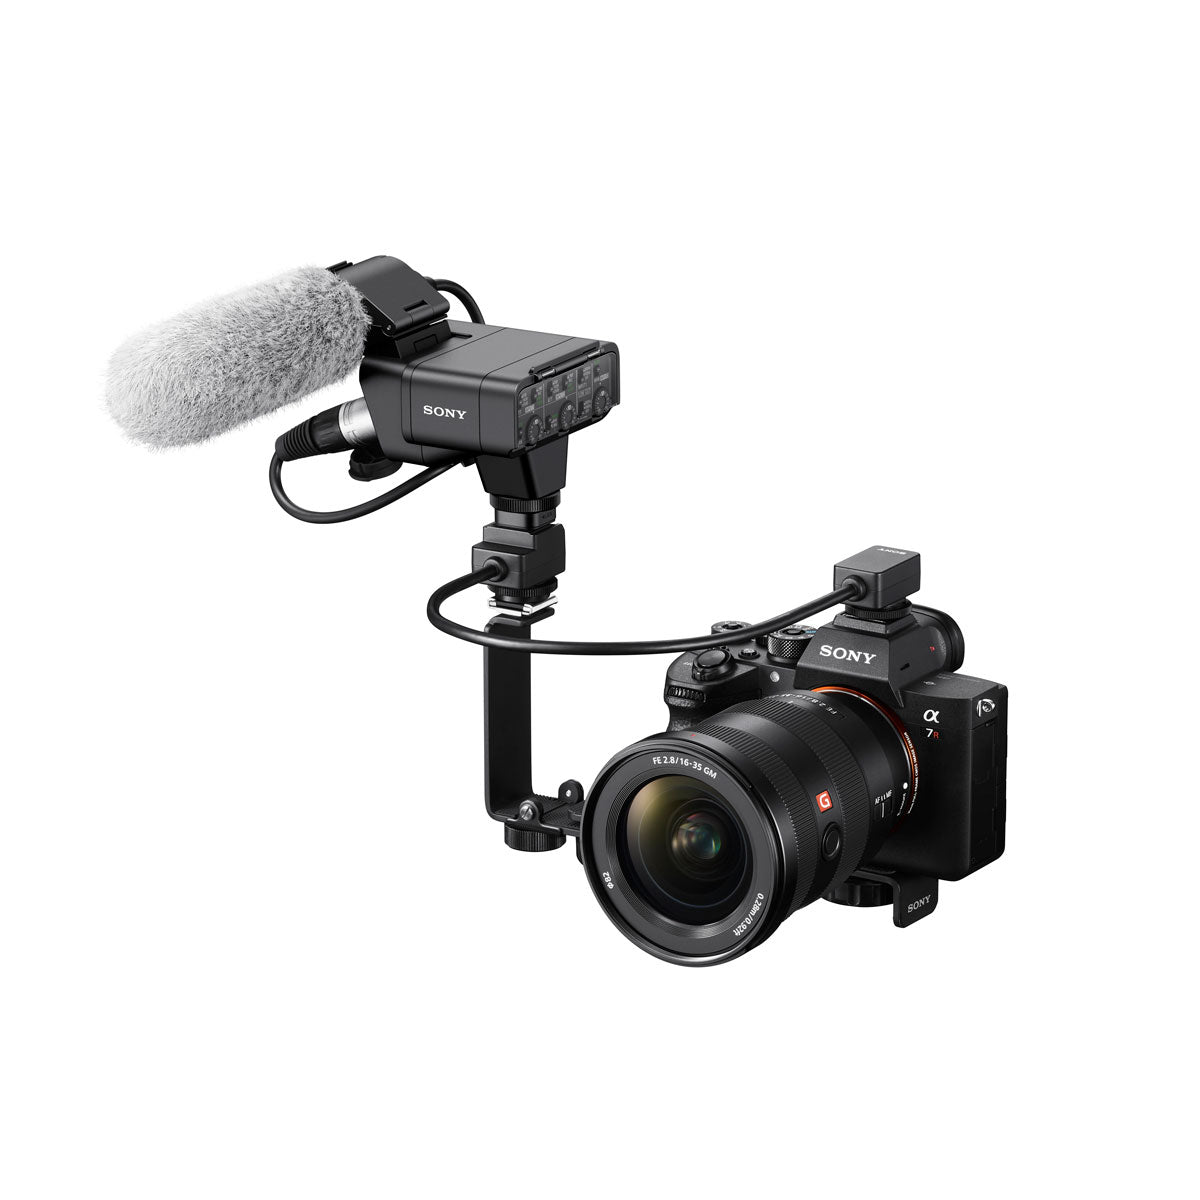 Sony XLR-K3M Adapter Kit with Microphone